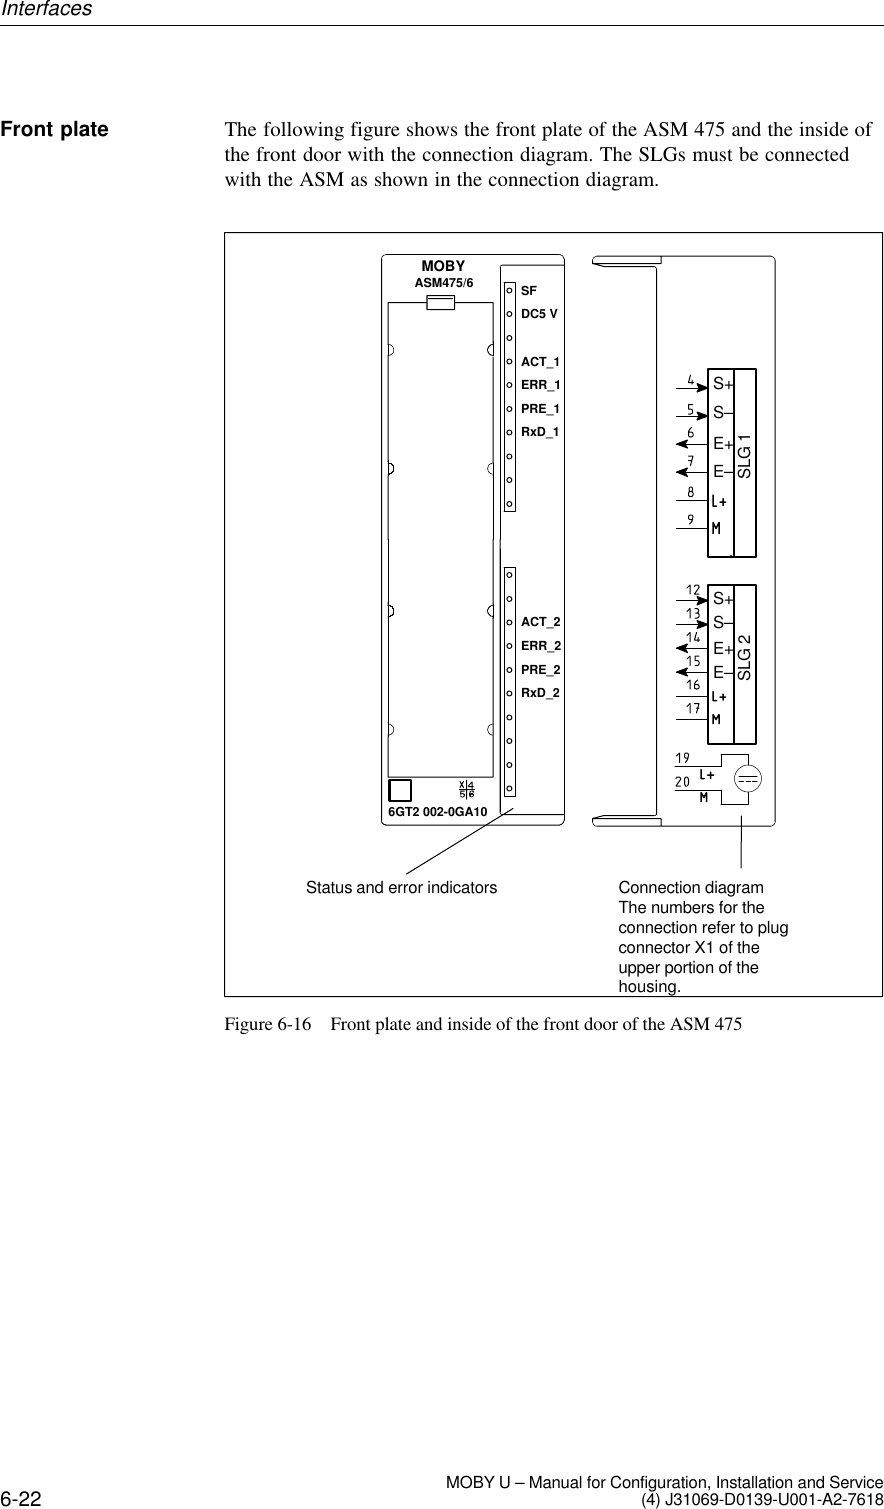 6-22 MOBY U – Manual for Configuration, Installation and Service(4) J31069-D0139-U001-A2-7618Front plate The following figure shows the front plate of the ASM 475 and the inside ofthe front door with the connection diagram. The SLGs must be connectedwith the ASM as shown in the connection diagram.Status and error indicatorsSLG 1S+S–E+E–SLG 2S+S–E+E–Connection diagramThe numbers for theconnection refer to plugconnector X1 of theupper portion of thehousing.ASM475/6 SFDC5 VACT_1ERR_1PRE_1RxD_1ACT_2ERR_2PRE_2RxD_26GT2 002-0GA10MOBYFigure 6-16 Front plate and inside of the front door of the ASM 475Interfaces